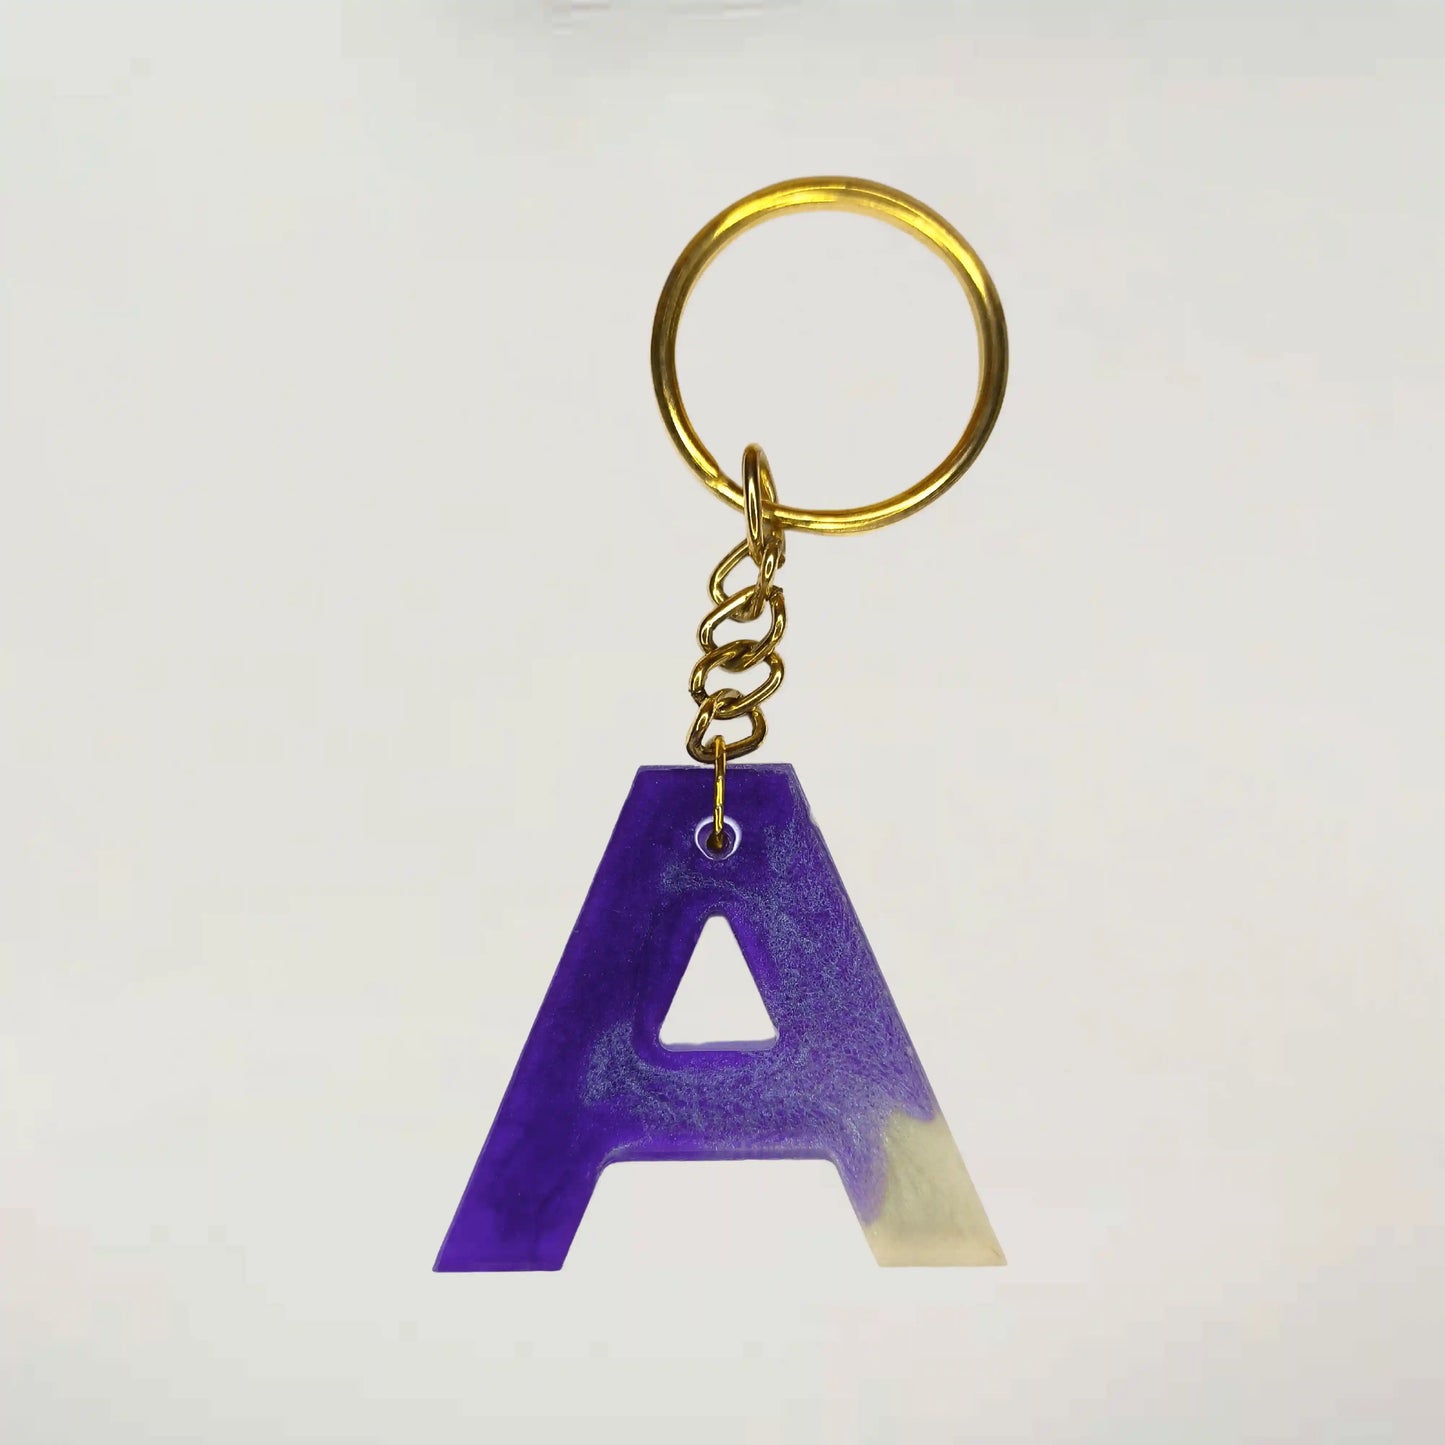 Buy Stylish resin keychains with A initials For Father's Day